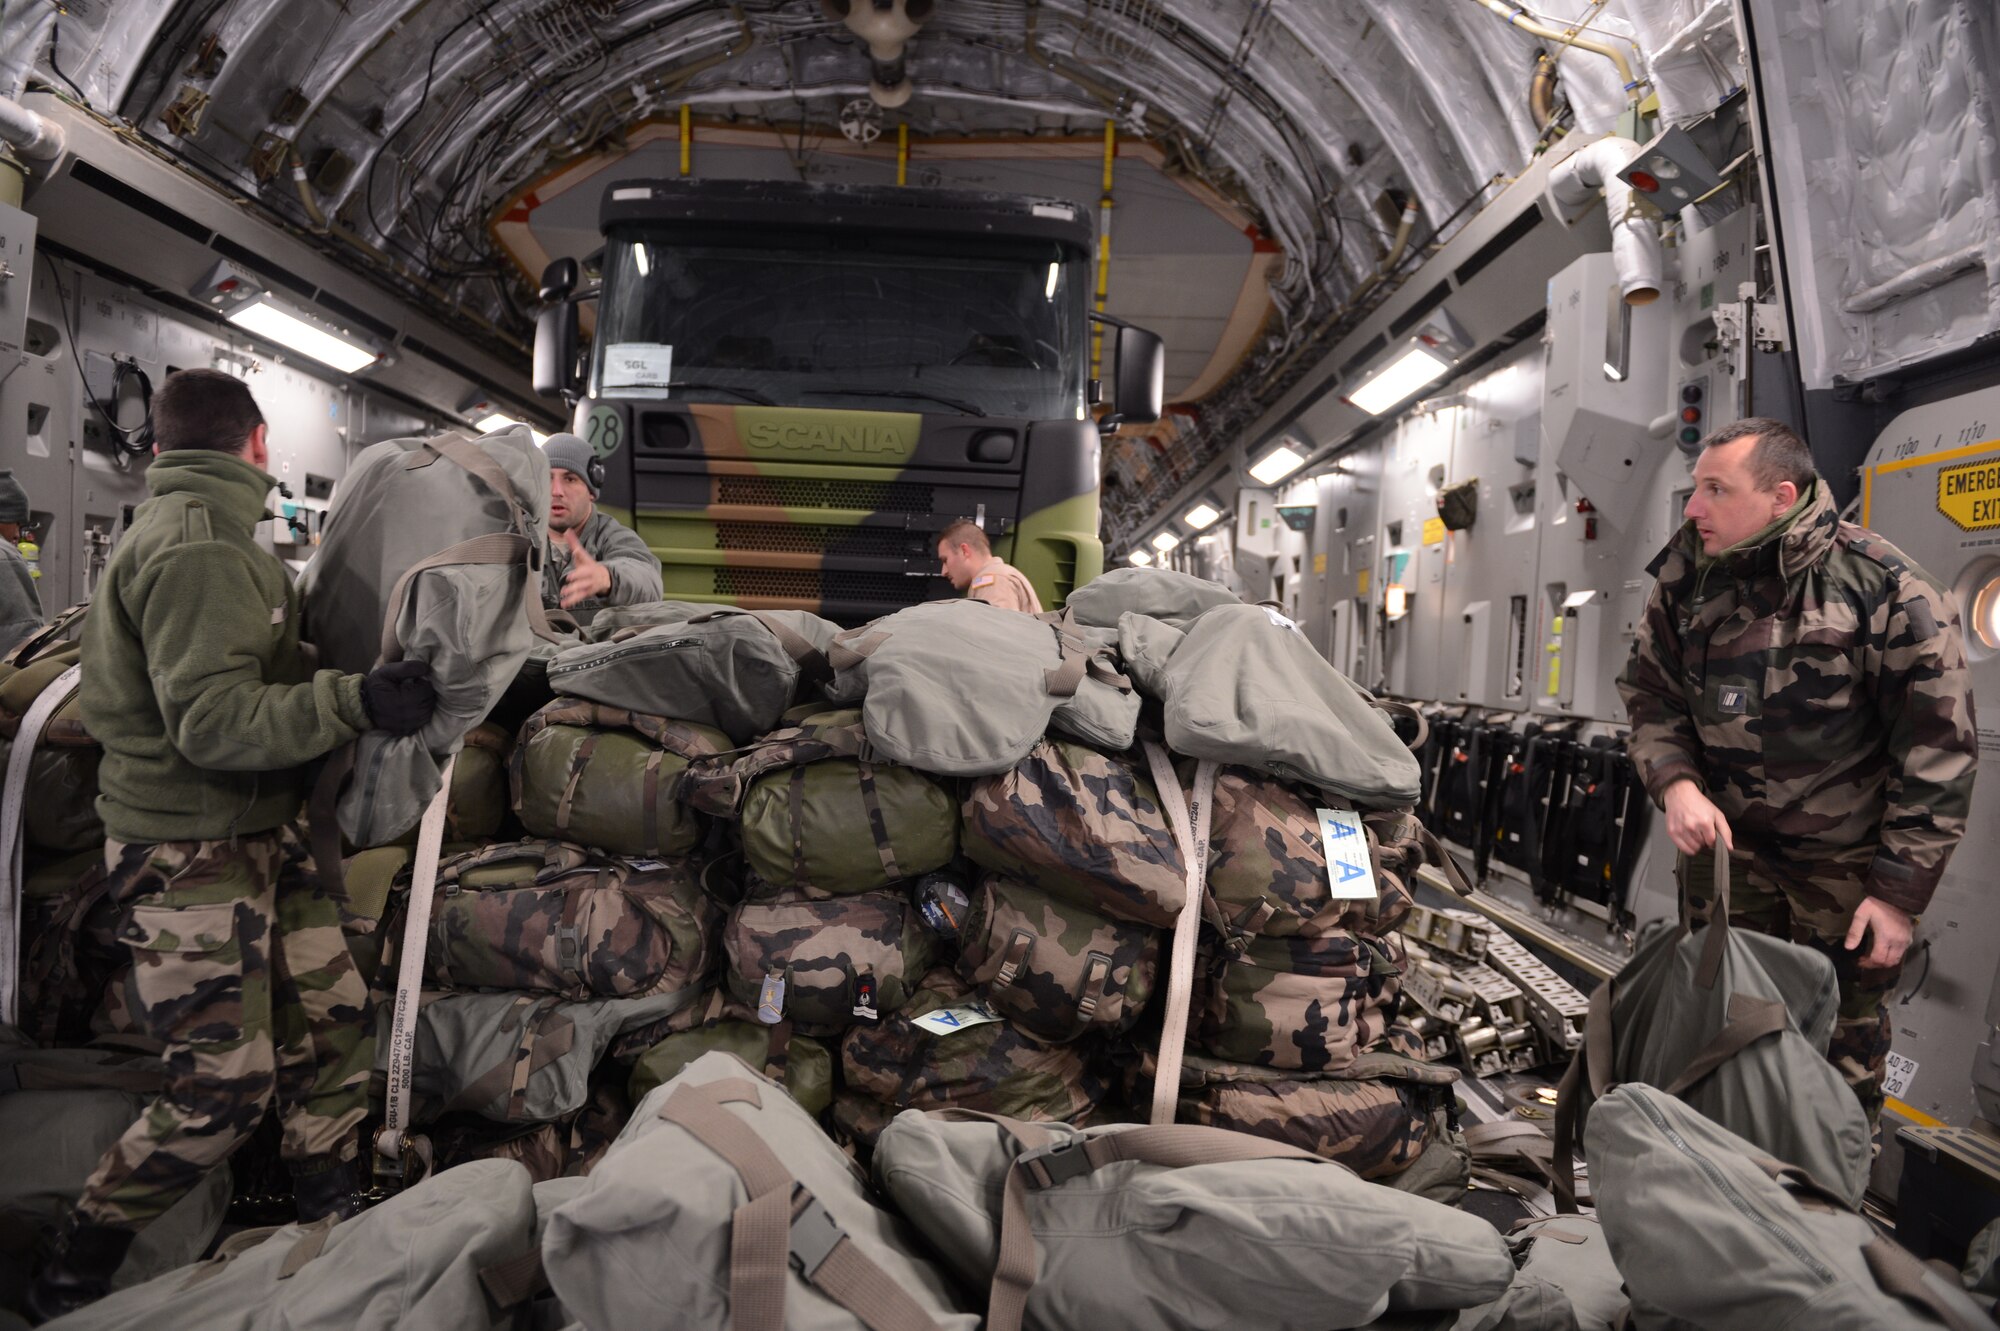 ISTRES, France -- Several French soldiers march to a U.S. Air Force C-17 Globemaster III here Jan. 20, 2013. The U.S. Air Force is transporting personnel to Mali in support of France's efforts to remove extremists who have taken control of the northern part of the country.  (U.S. Air Force photo by Senior Airman James Richardson) (Released)

